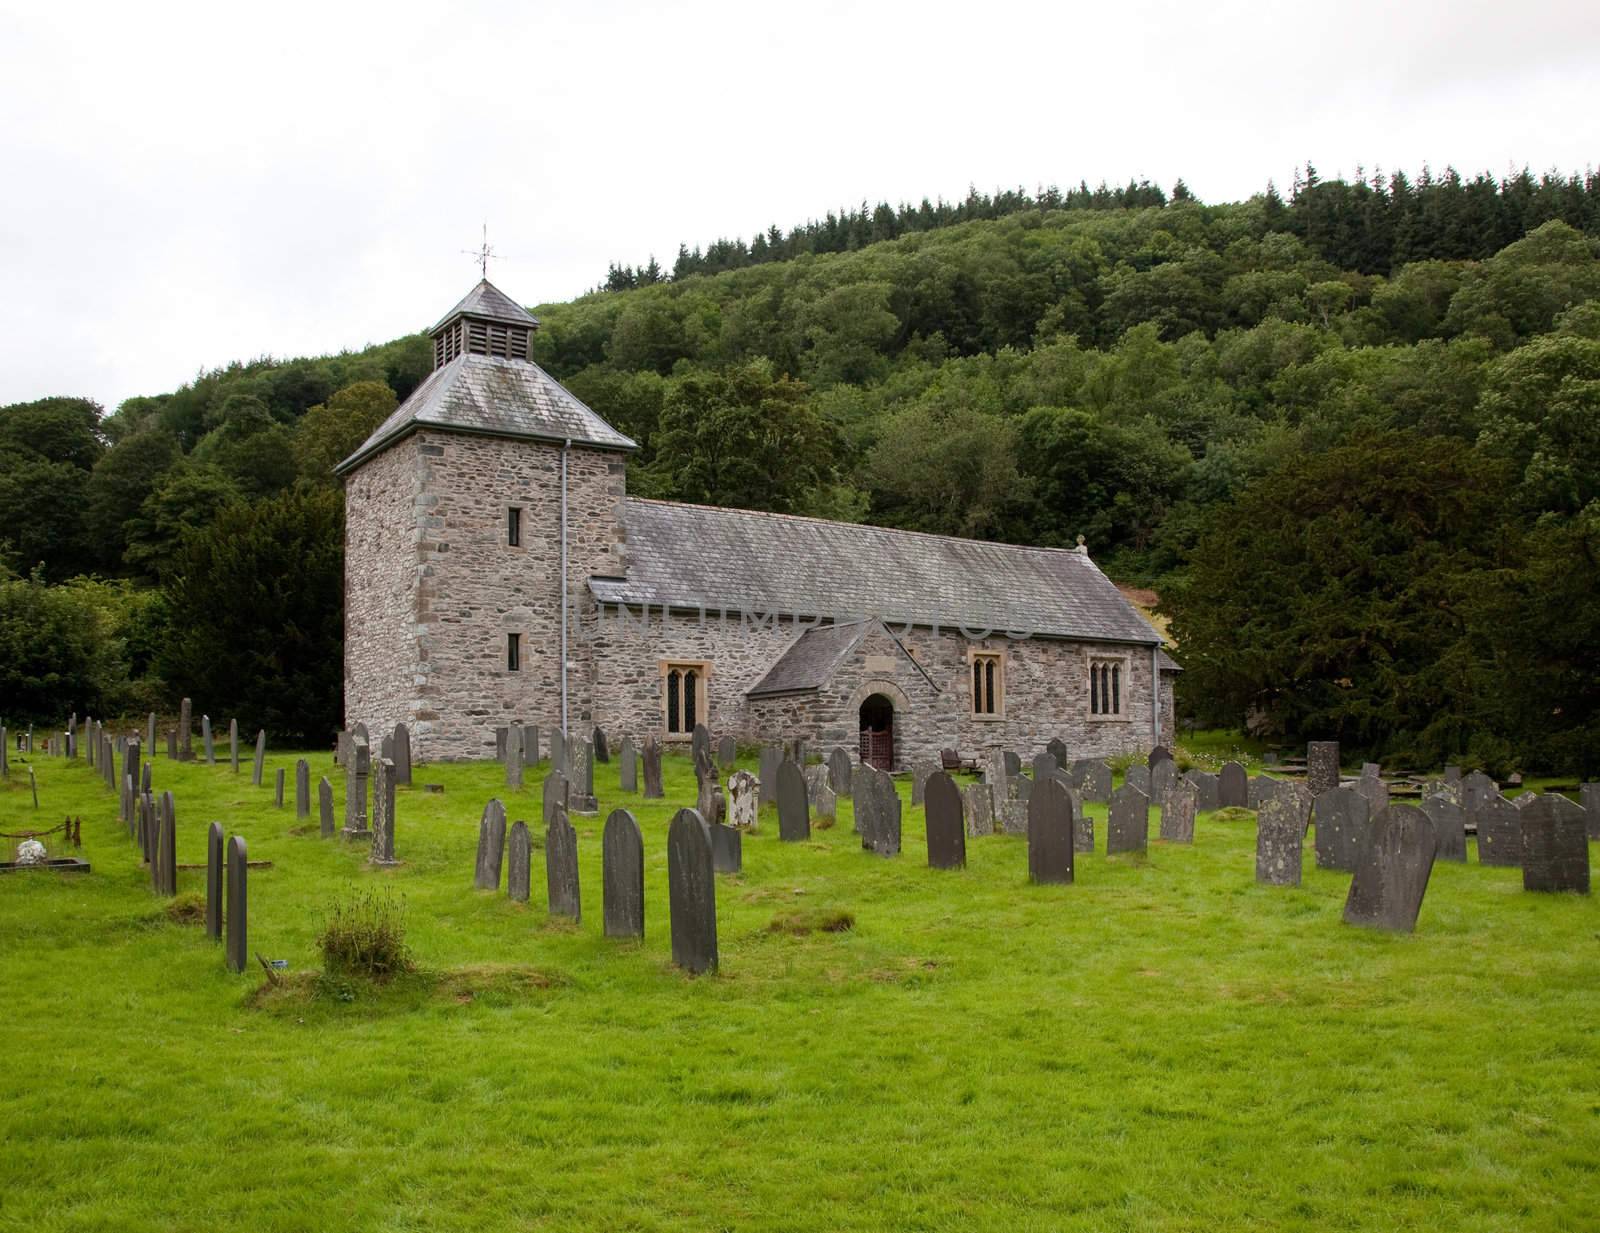 View across Graveyard to old stone church in north Wales